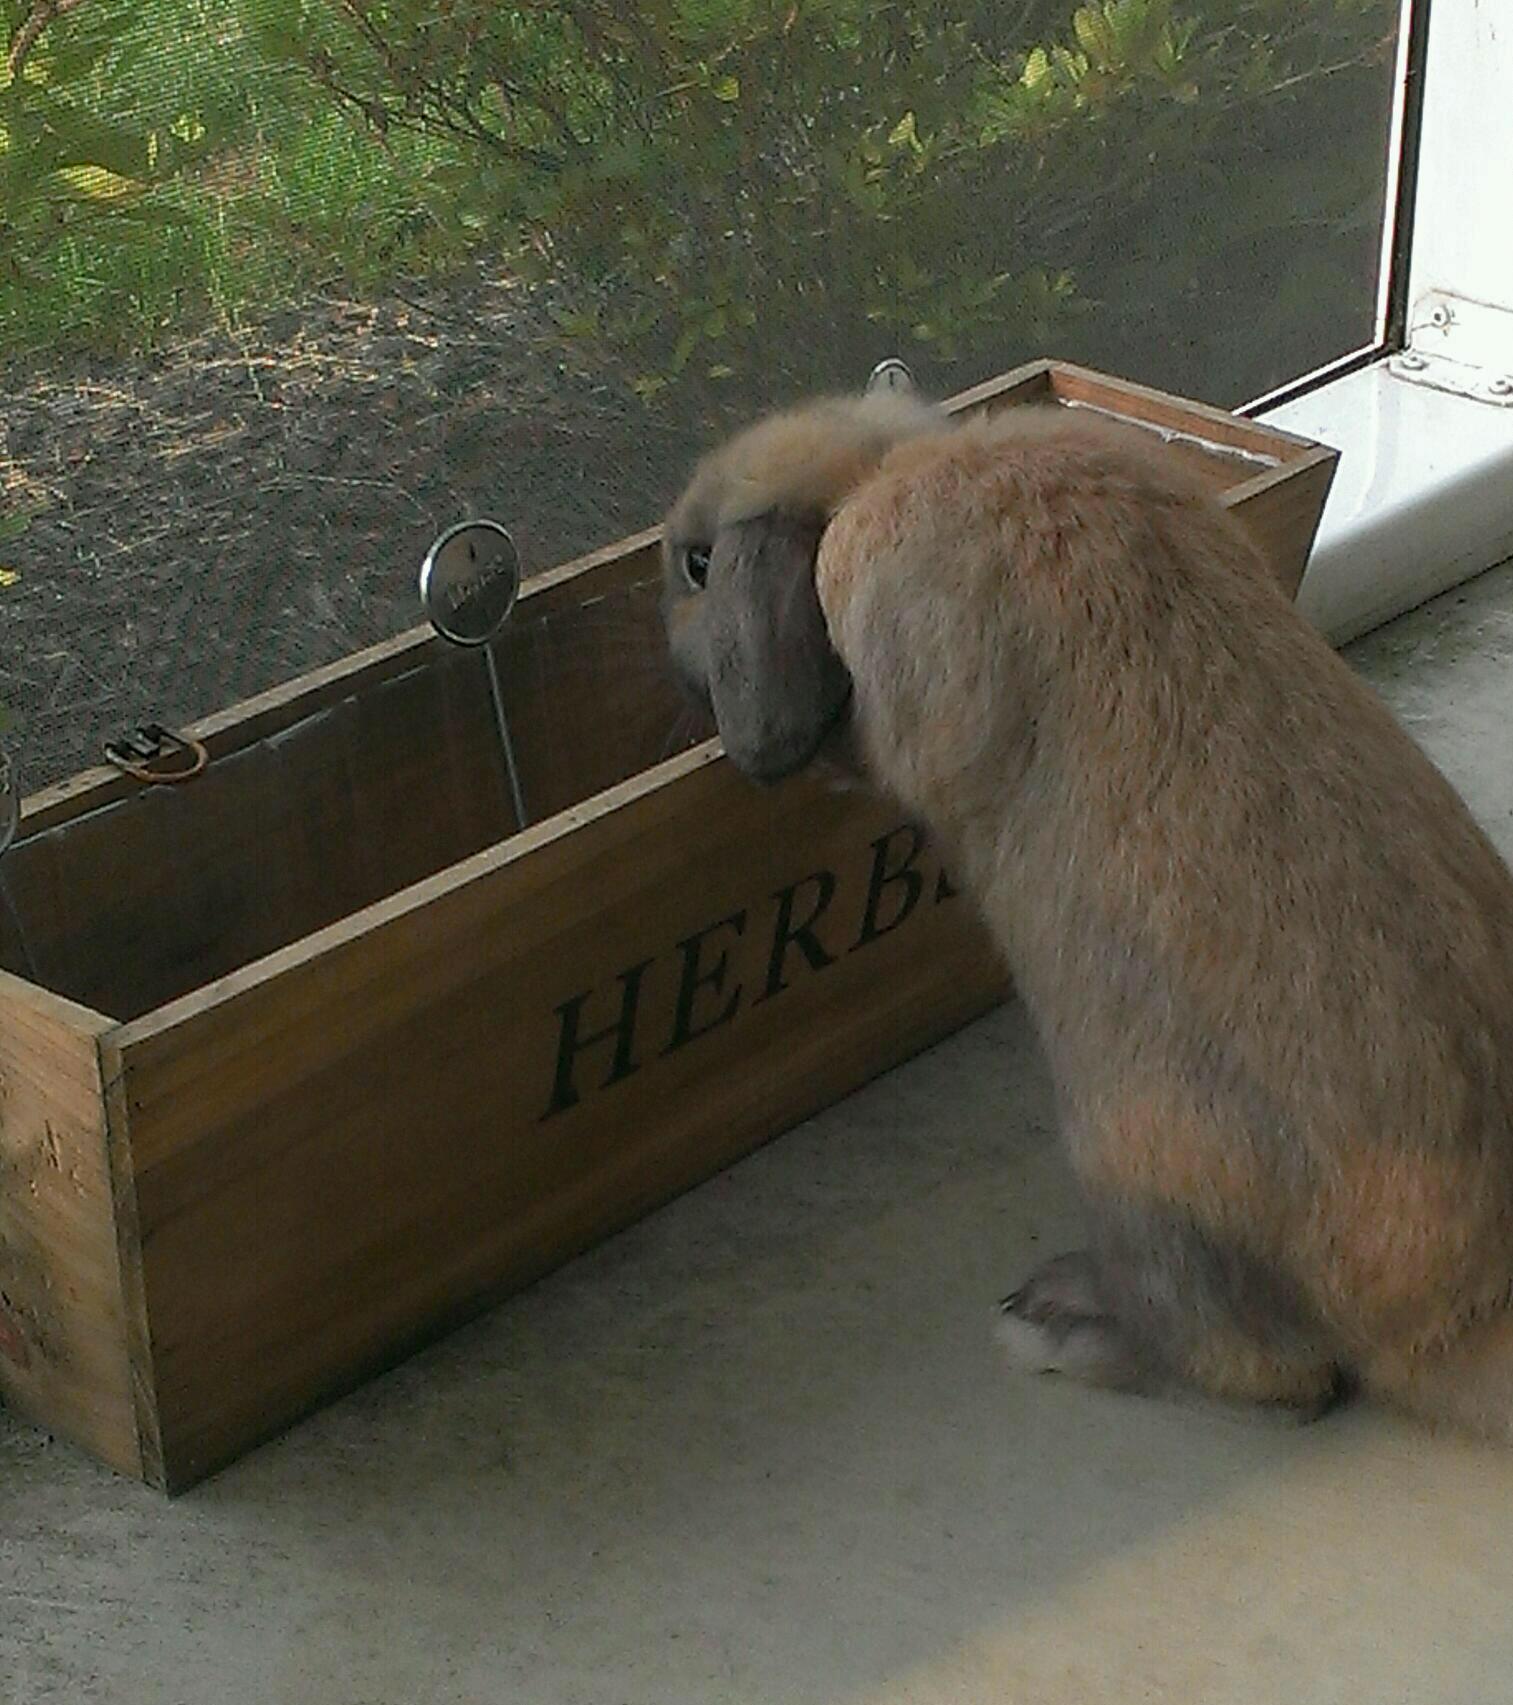 Bunny Checks the Planter to See If Any Greens Have Appeared Yet